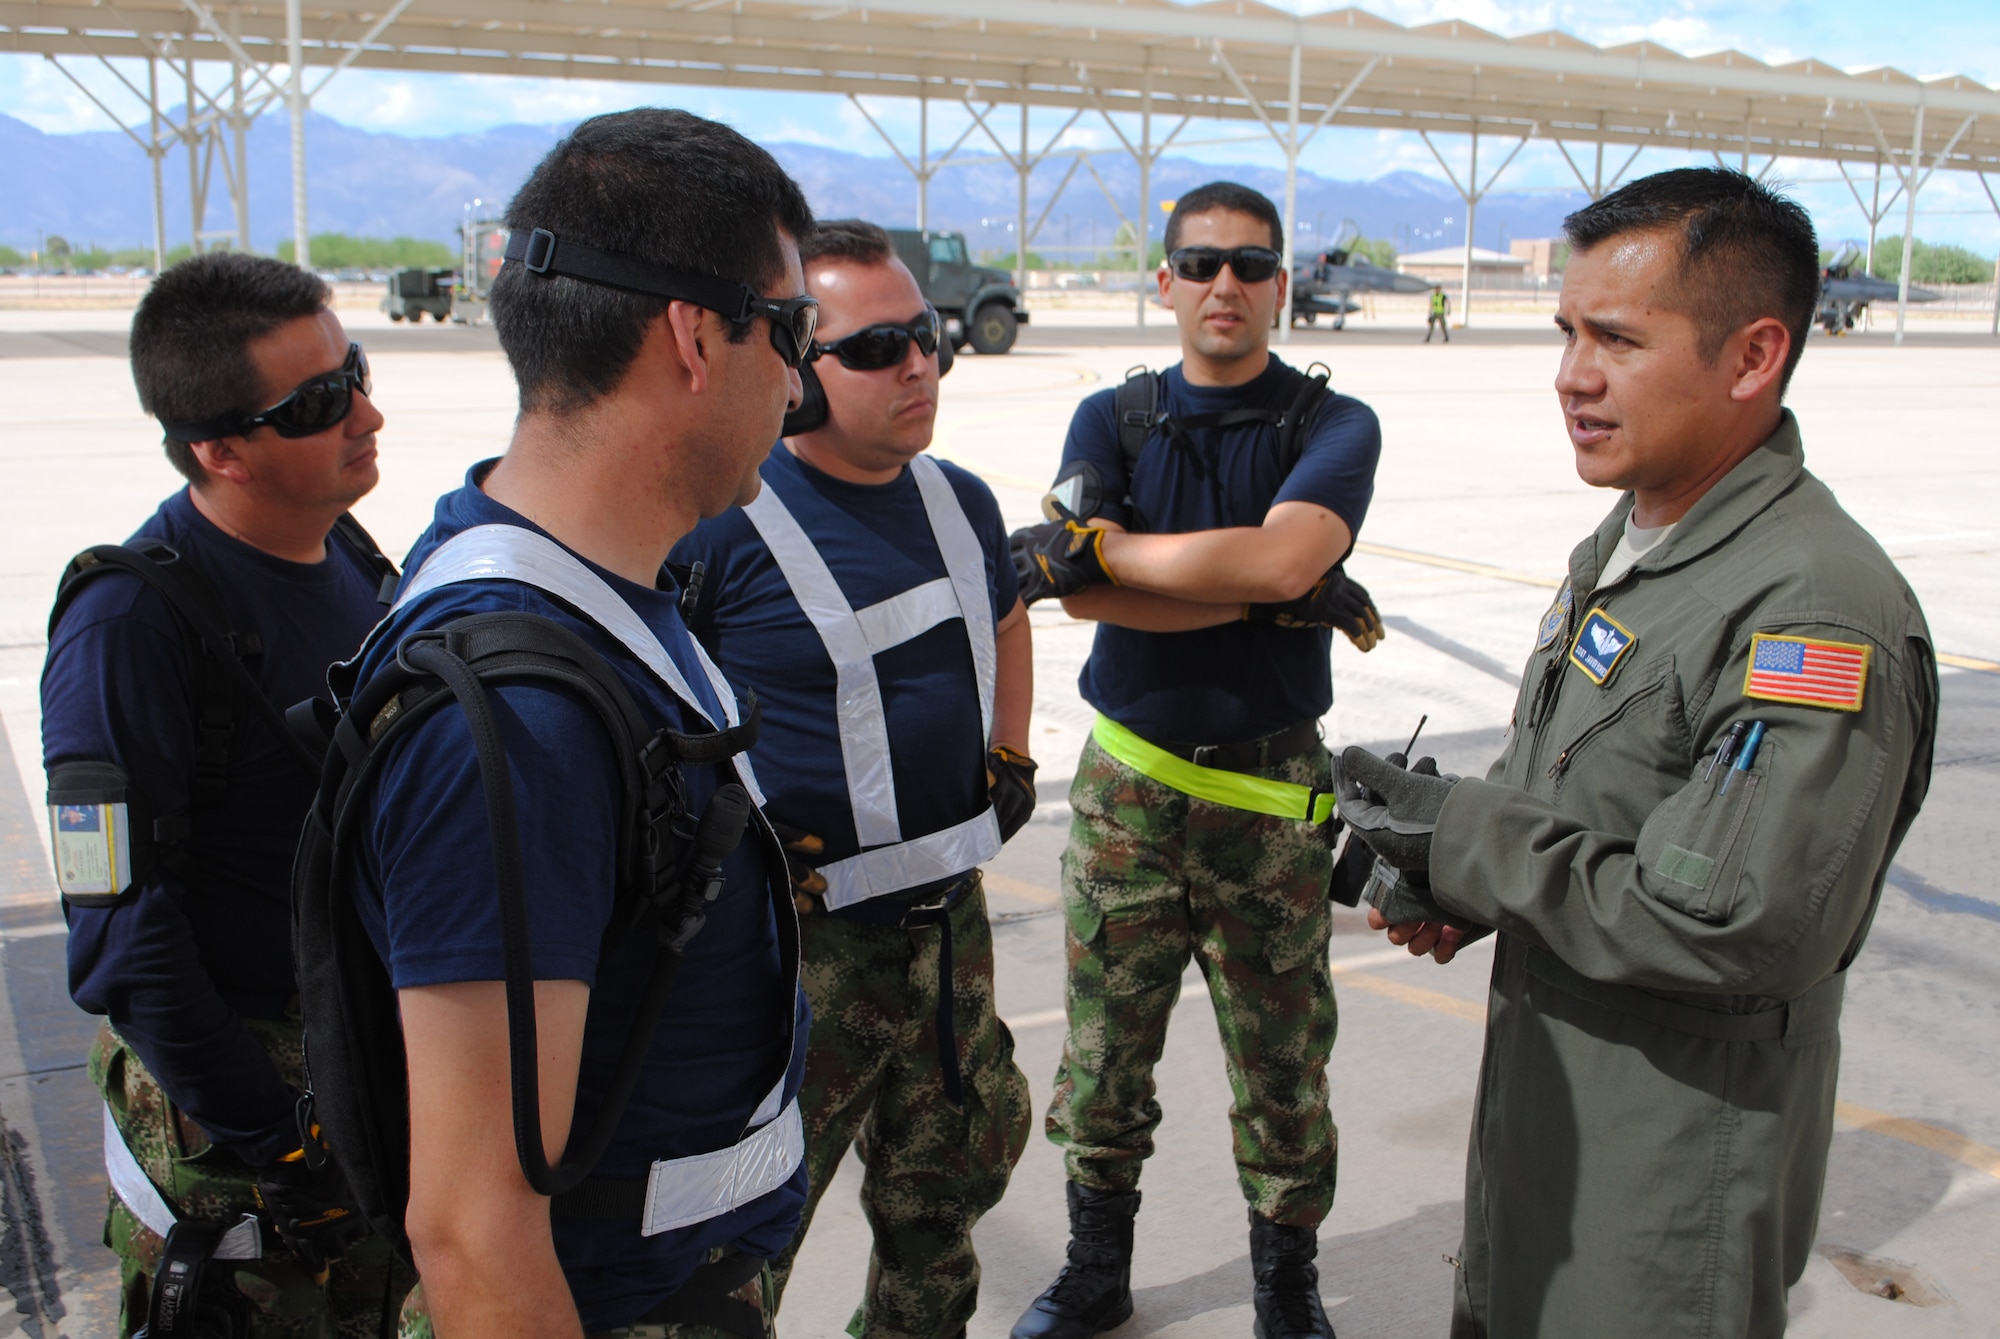 Staff Sgt. Javier Borges, 571st Mobility Support Advisory Squadron air advisor loadmaster, discuss proper palletizing procedures with members of the Colombian air force for their participation in Red Flag (U.S. Air Force photo by Staff Sgt. John Ayre)